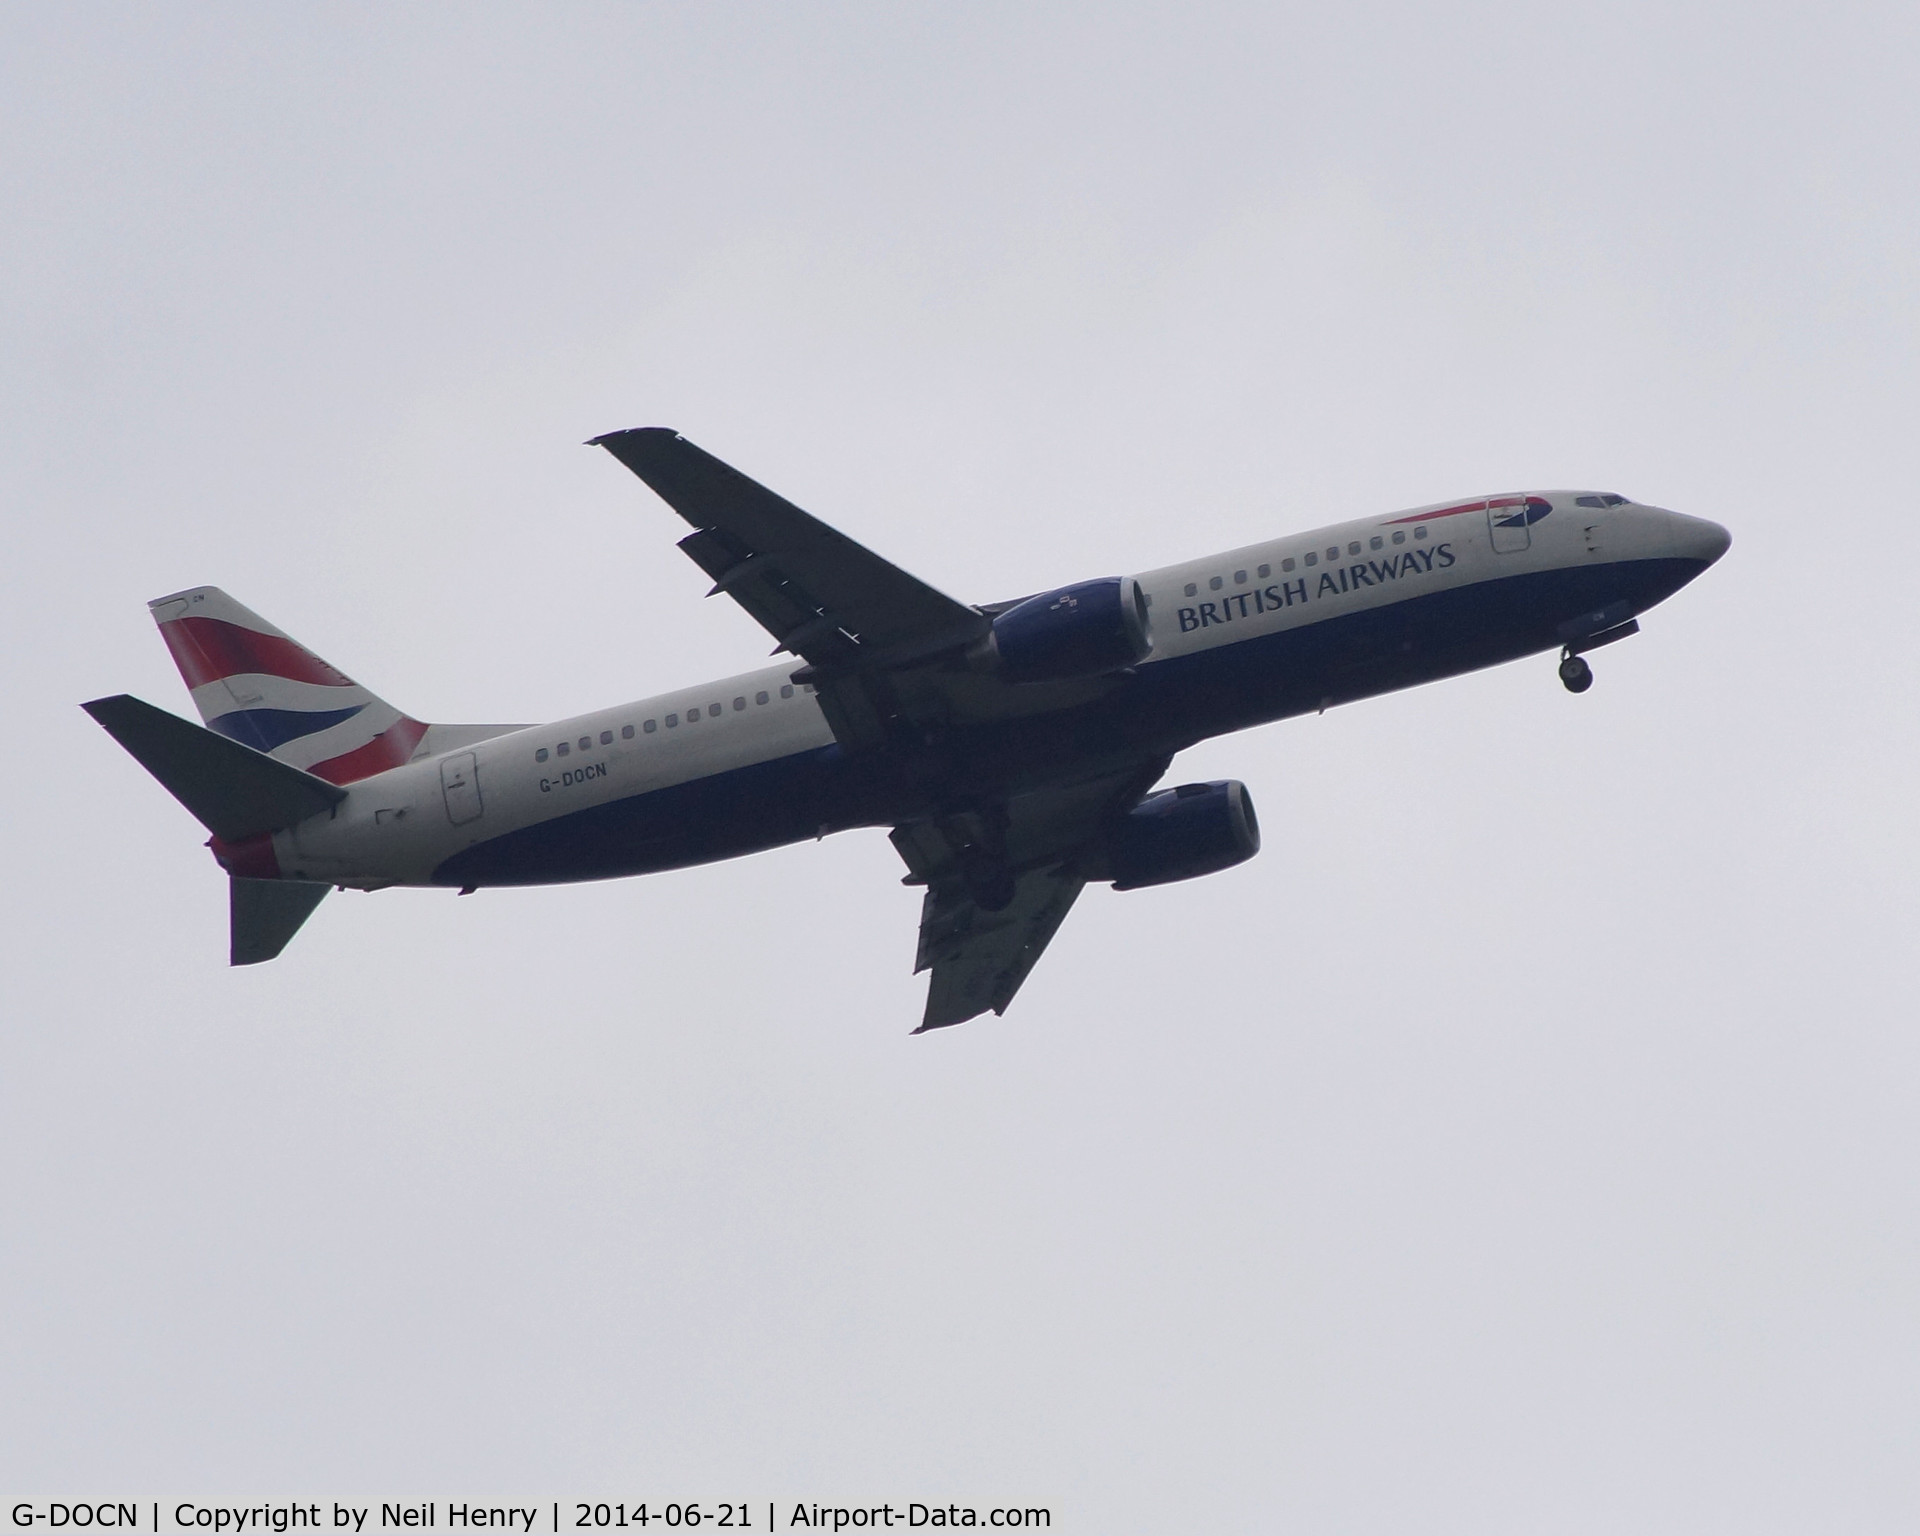 G-DOCN, 1992 Boeing 737-436 C/N 25848, On eastern approach to London Gatwick - over Newchapel, Surrey, UK